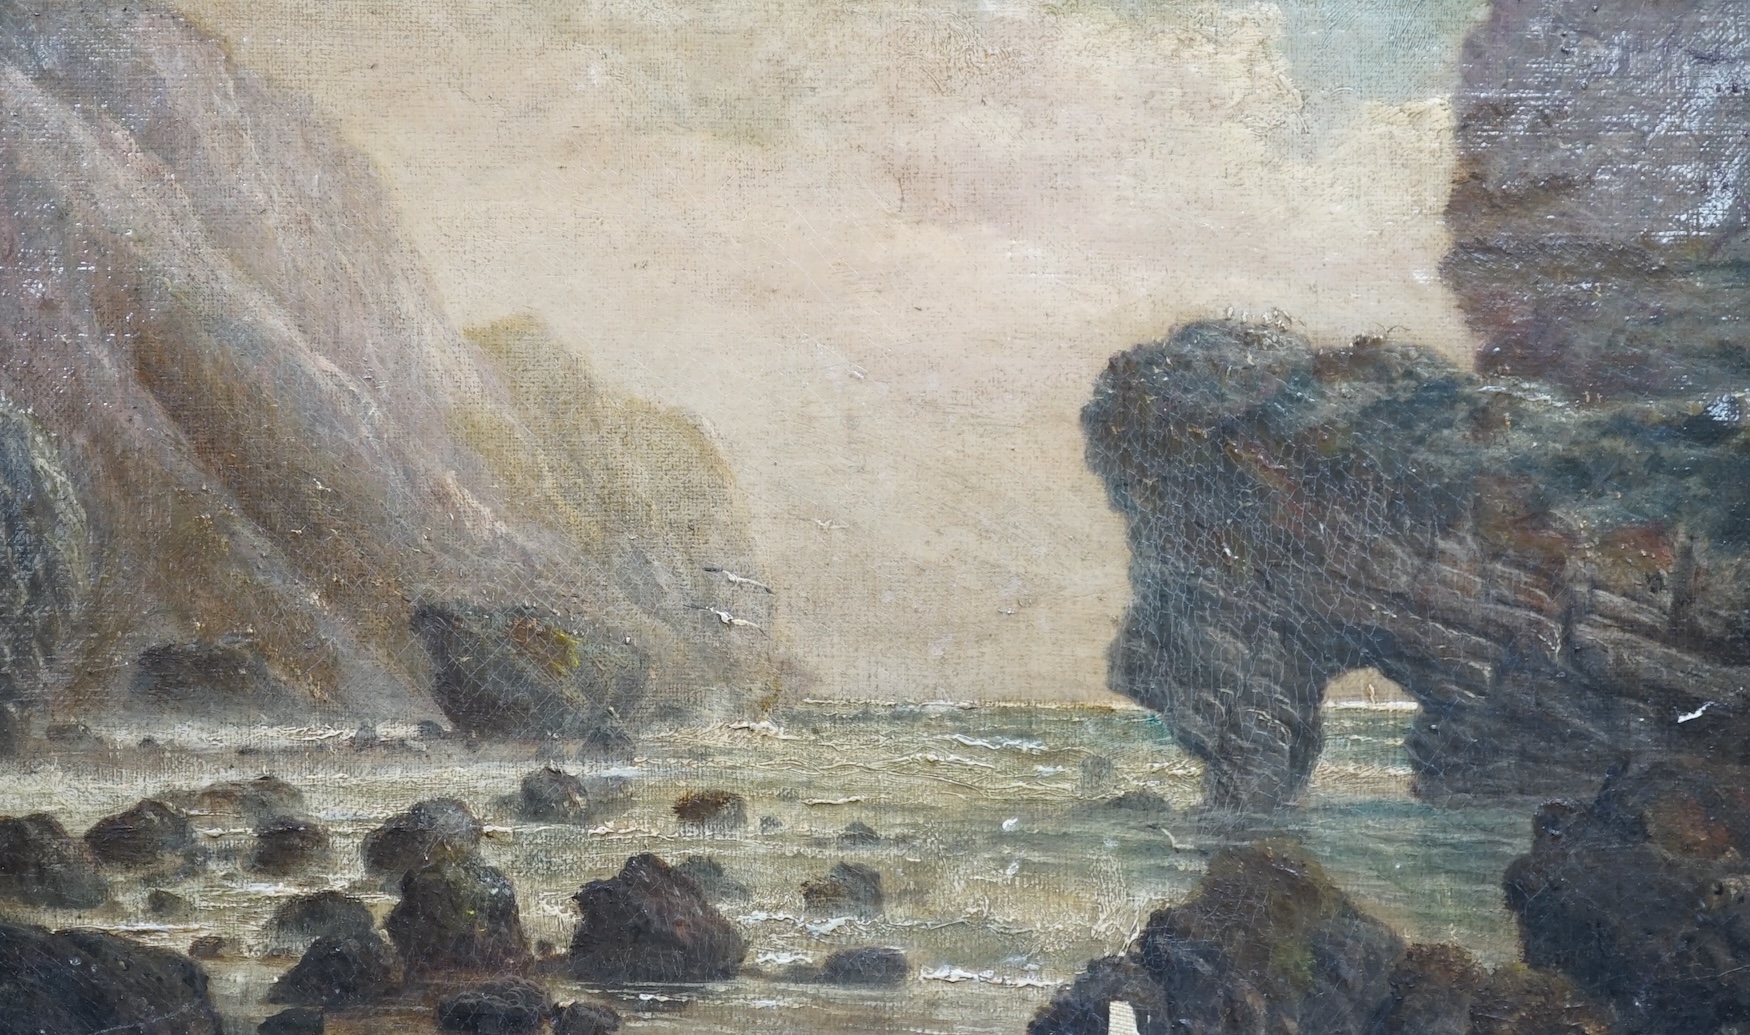 19th century English School, oil on board, Dorset Jurassic coast, showing a coastal rock formation similar to Durdle Door, 18 x 29cm, gilt frame. Condition - fair, some paint chips                                        